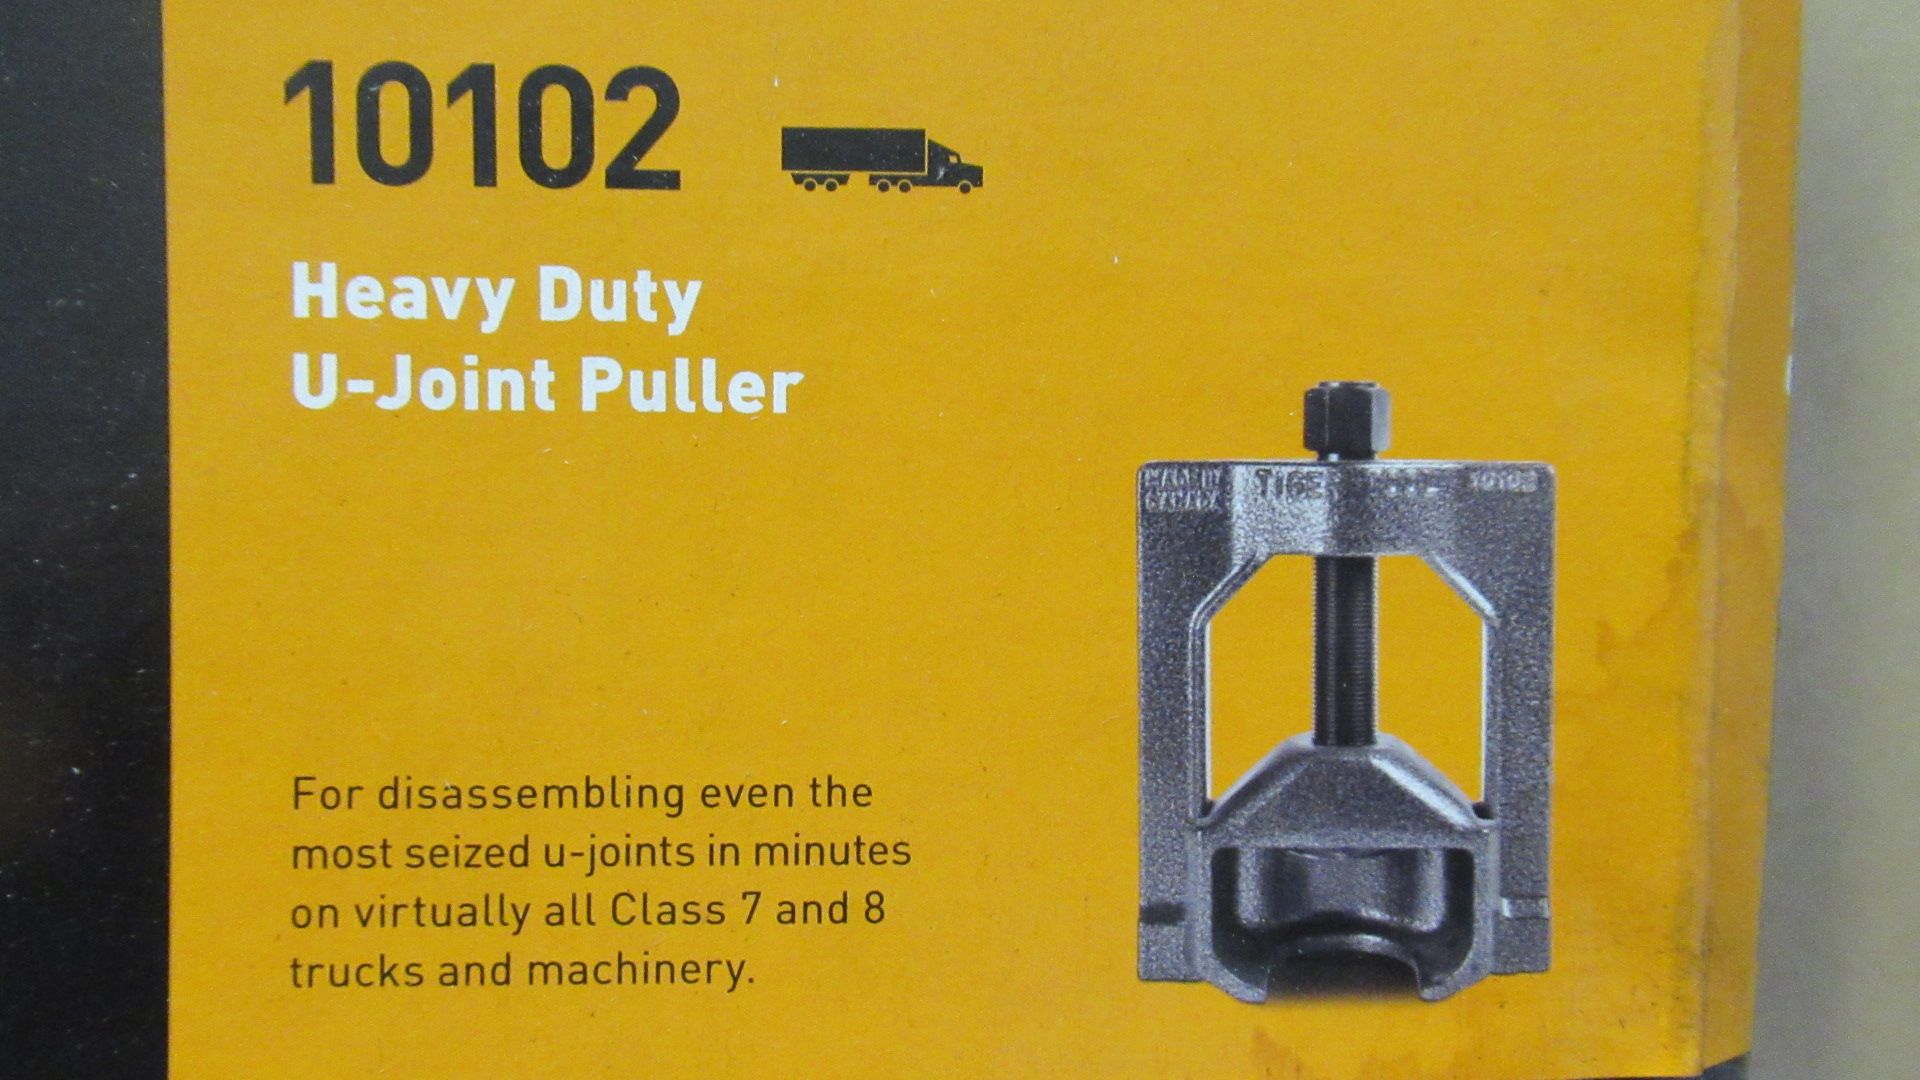 HEAVY DUTY U-JOINT PULLER TIGER TOOLS 10102